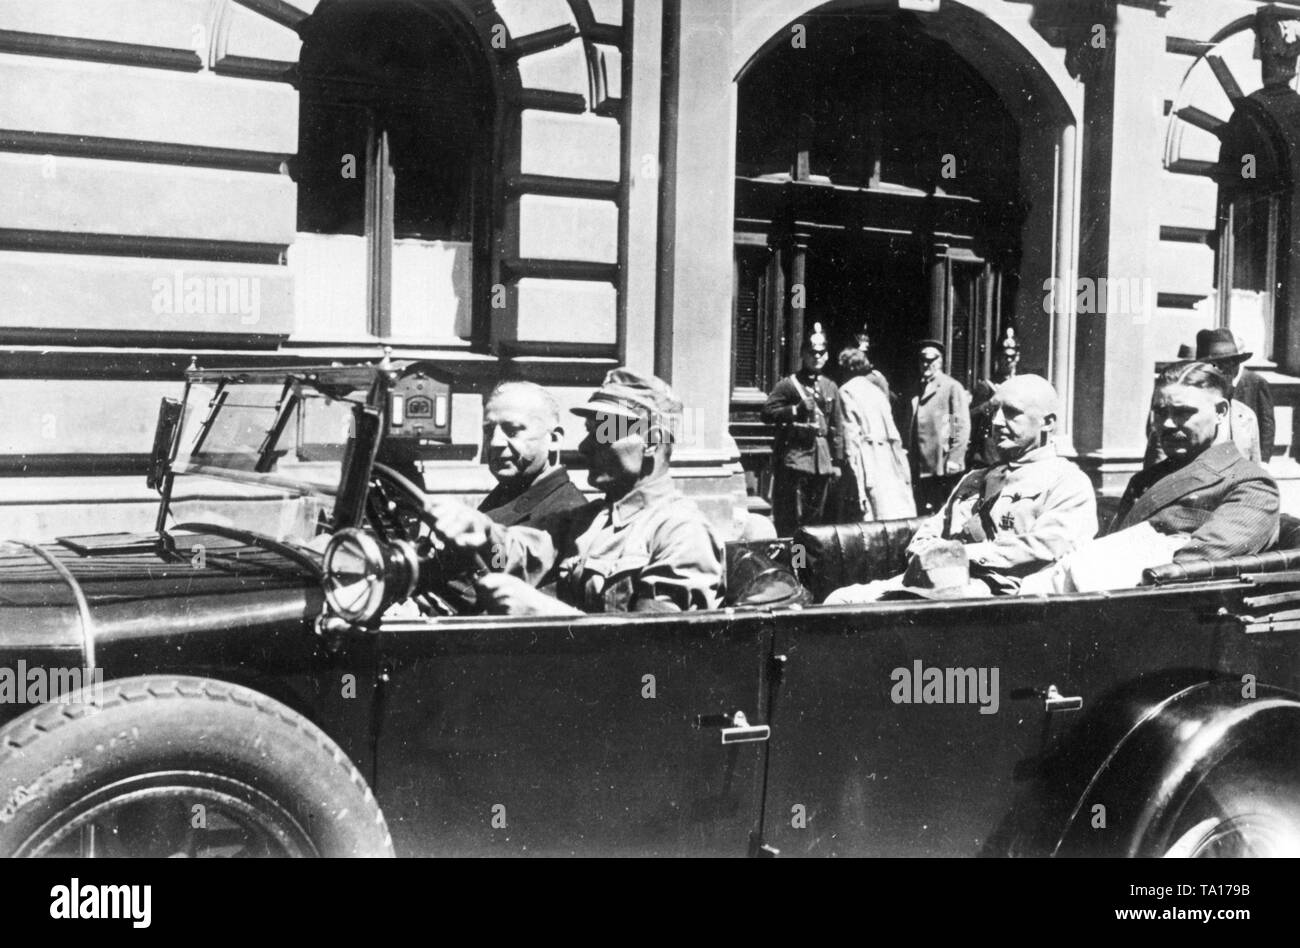 Departure of the Nazi leaders from the Bavarian Landtag building, which is secured by the police with carabiners. The members of the NSDAP were led out from the government building on command of the President of the Landtag, as they had previously refused to take off their party uniforms. In the car at the rear on the left, the future Gauleiter of Frankonia, Julius Streicher. Next to the driver, the later Gauleiter of Munich in Upper Bavaria, Adolf Wagner. Stock Photo